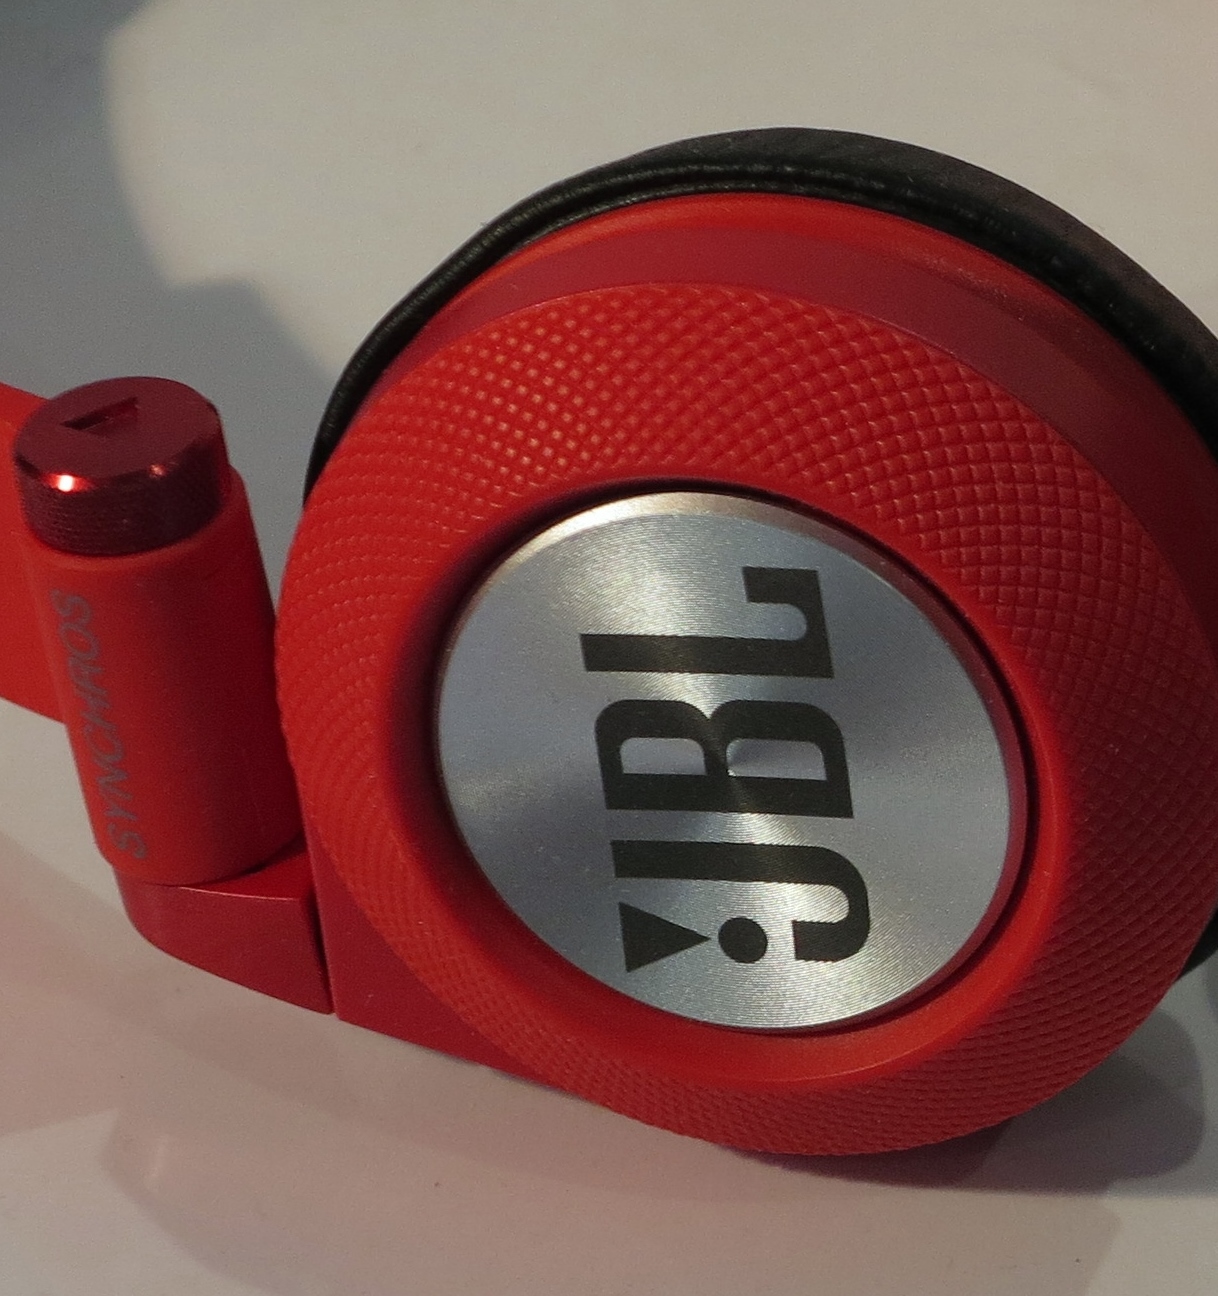 Product Review- JBL Synchros E30 headphones